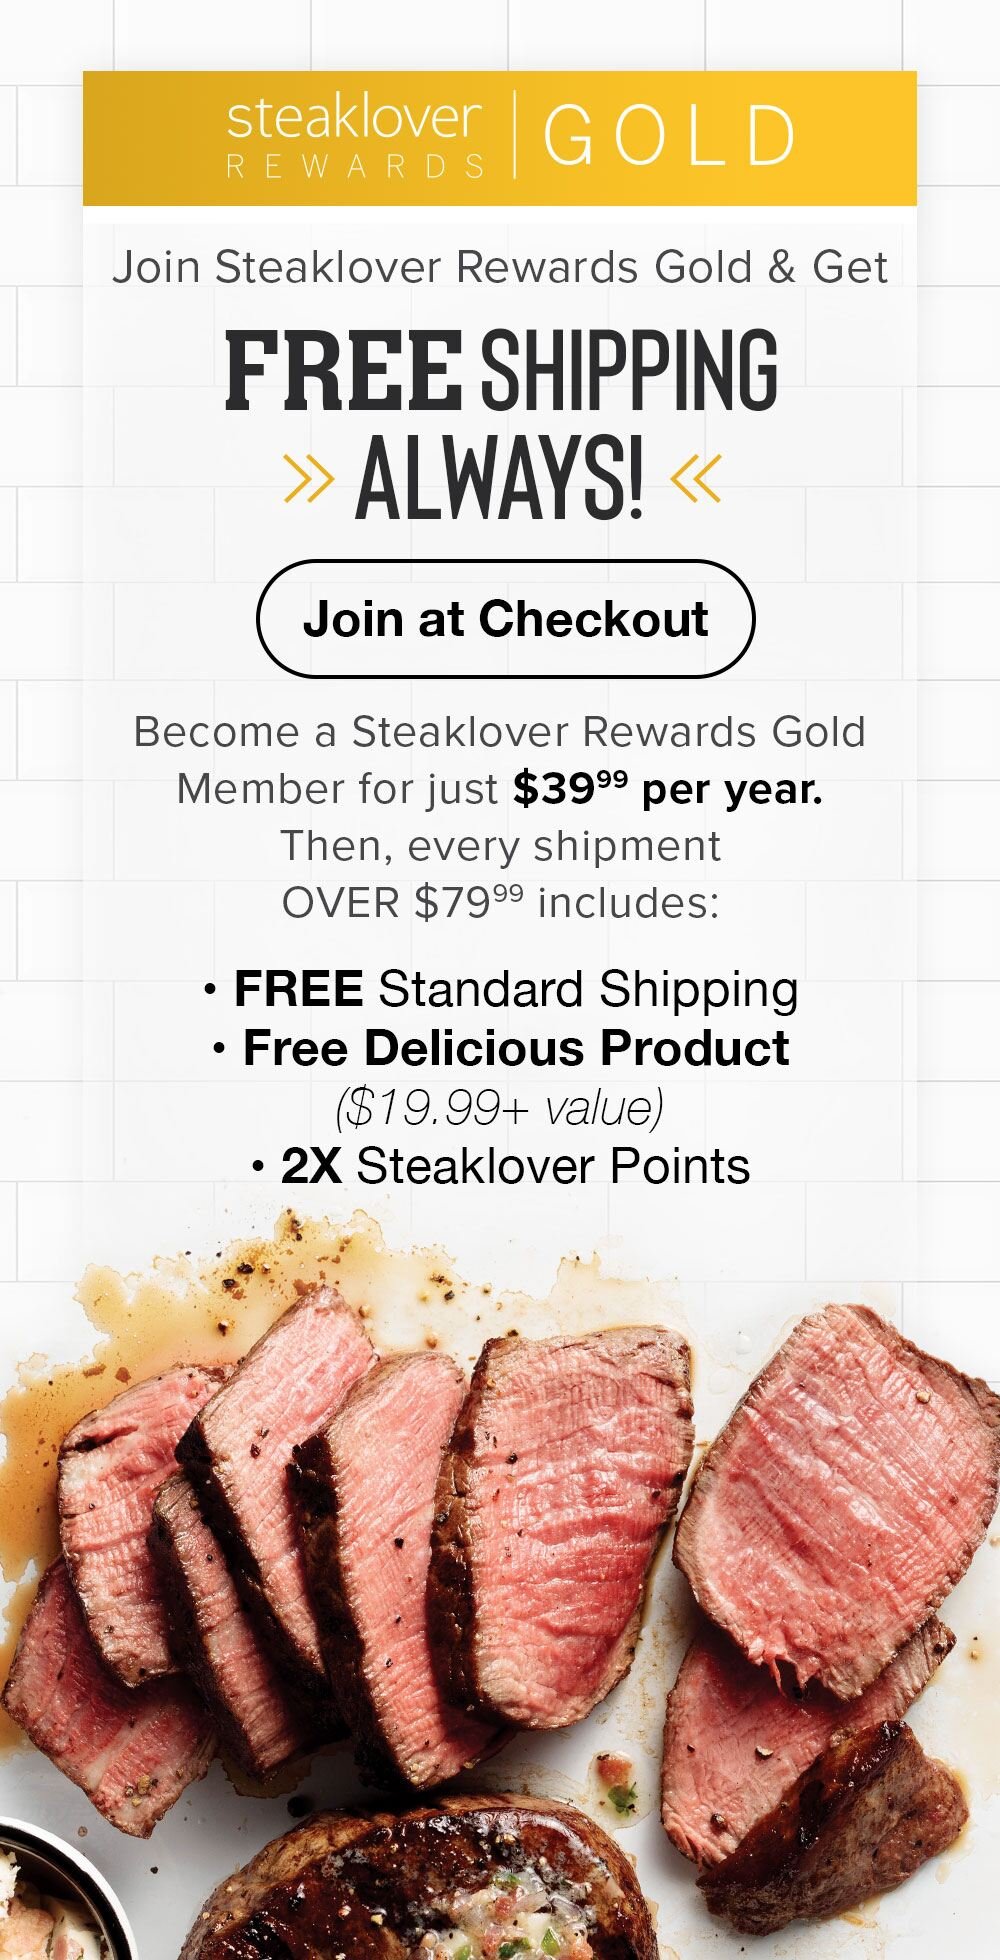 Steaklover Rewards Gold | FREE SHIPPING ALWAYS! | Join at Checkout | Become a Steaklover Rewards Gold Member for just $39.99 per year. Then, every shipment OVER $79.99 includes: FREE Standard Shipping, Free Delicious Product ($19.99+ value), 2X Steaklover Points